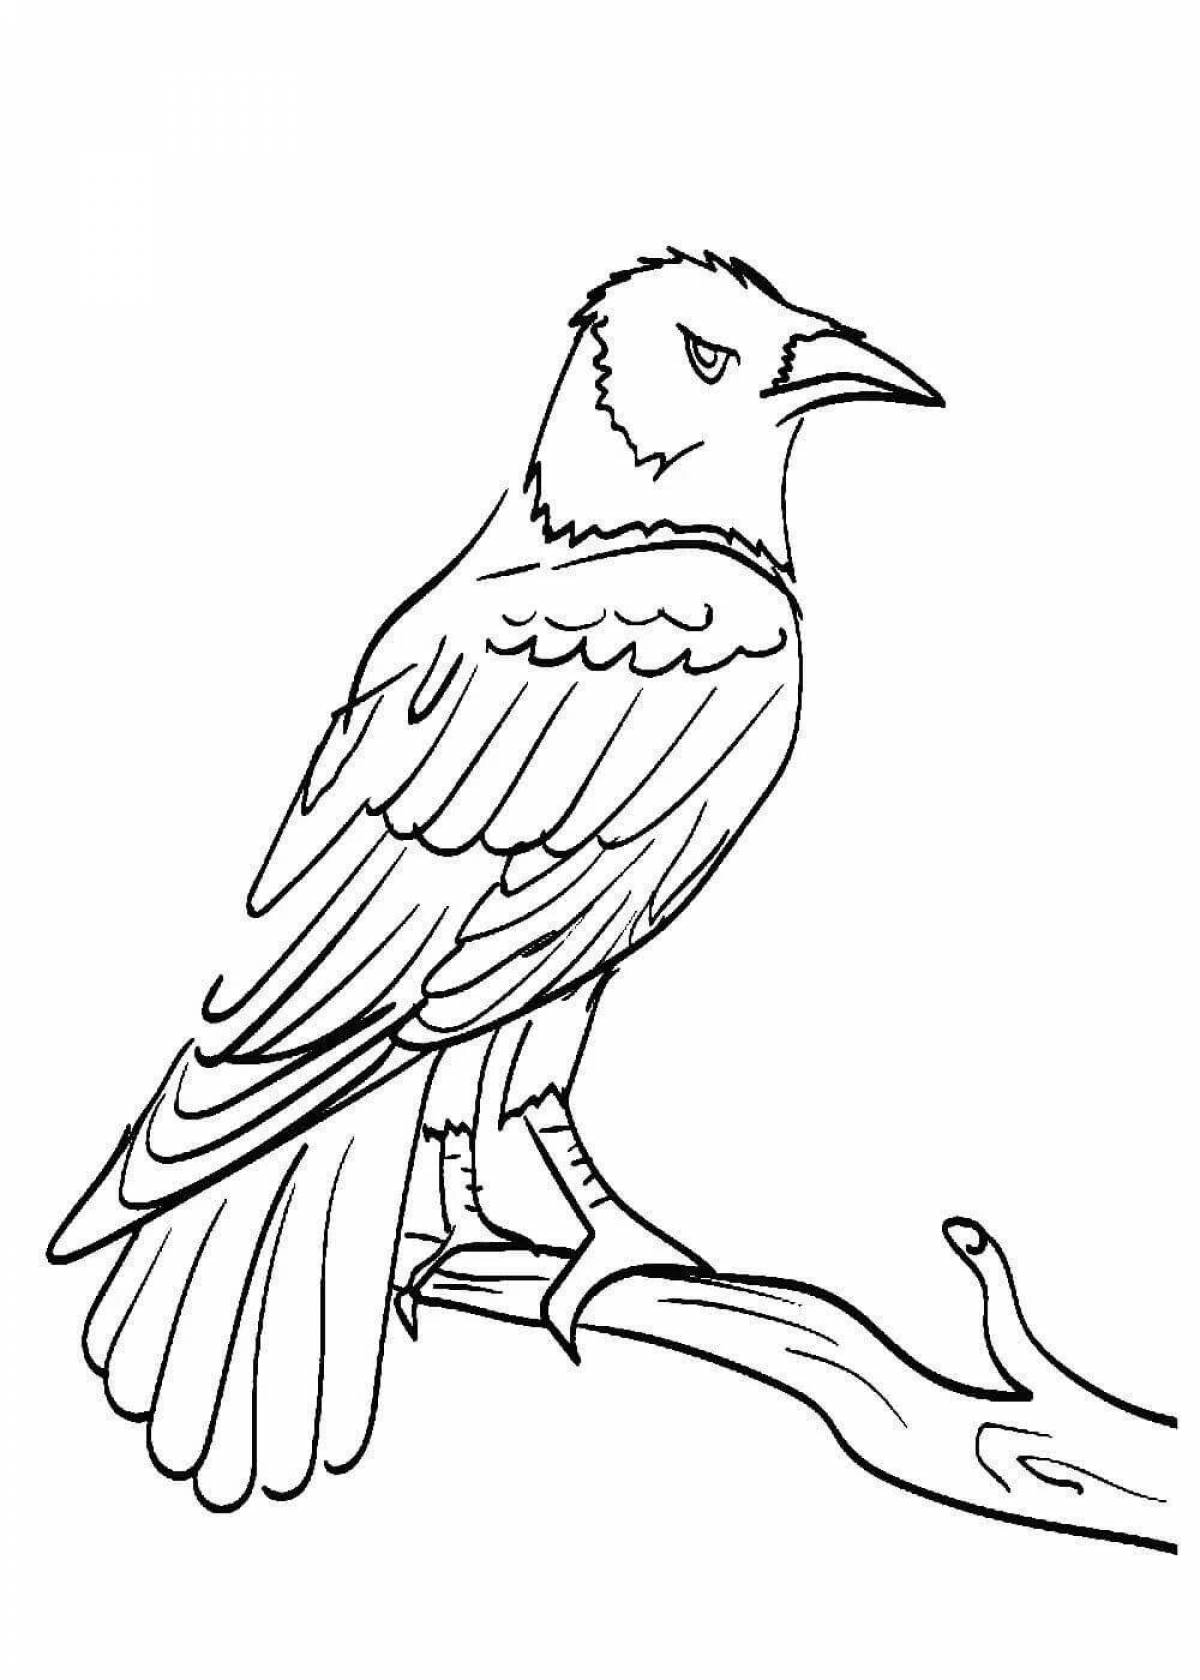 Creative drawing of a crow